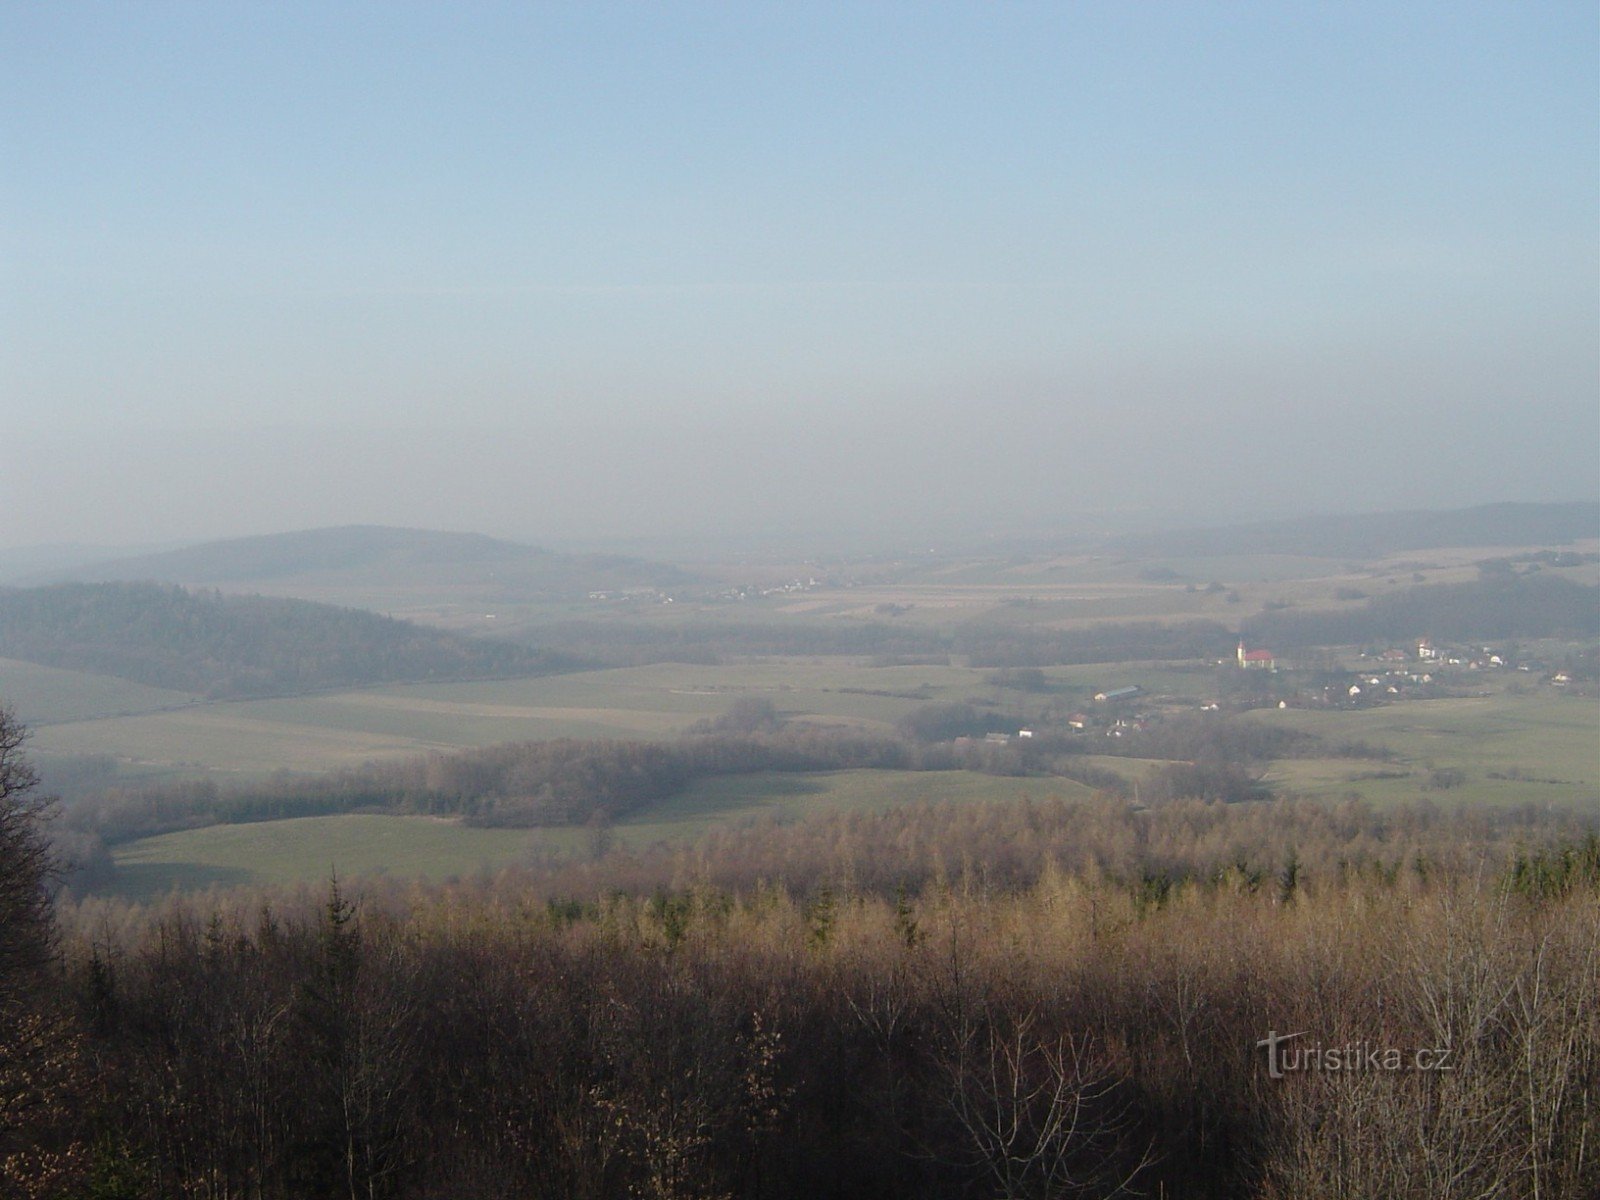 A view of the Polish plain